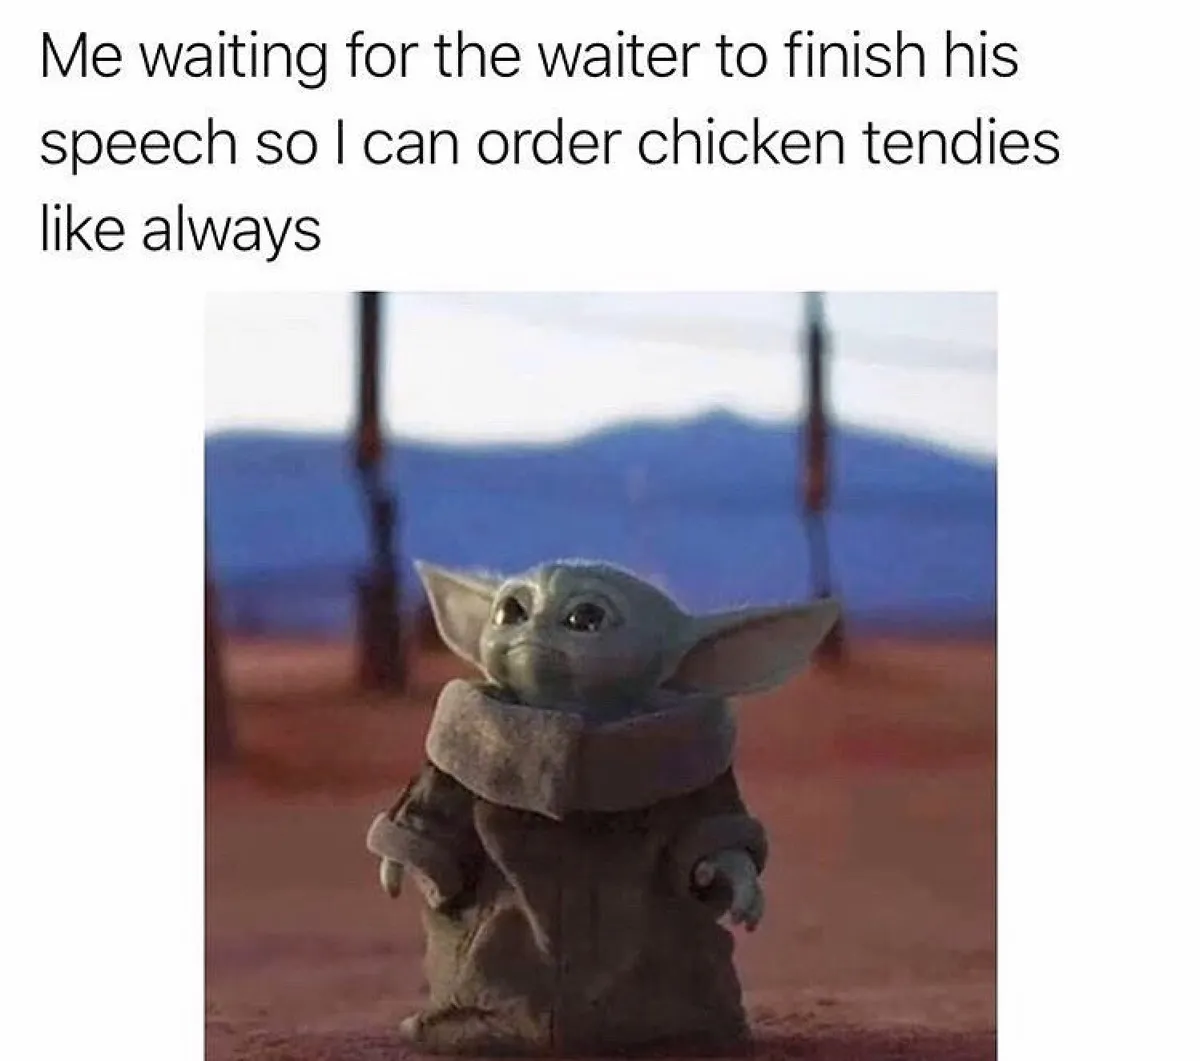 photo of baby yoda captioned: Me waiting for the waiter to finish his speech so I can order chicken tendies like always